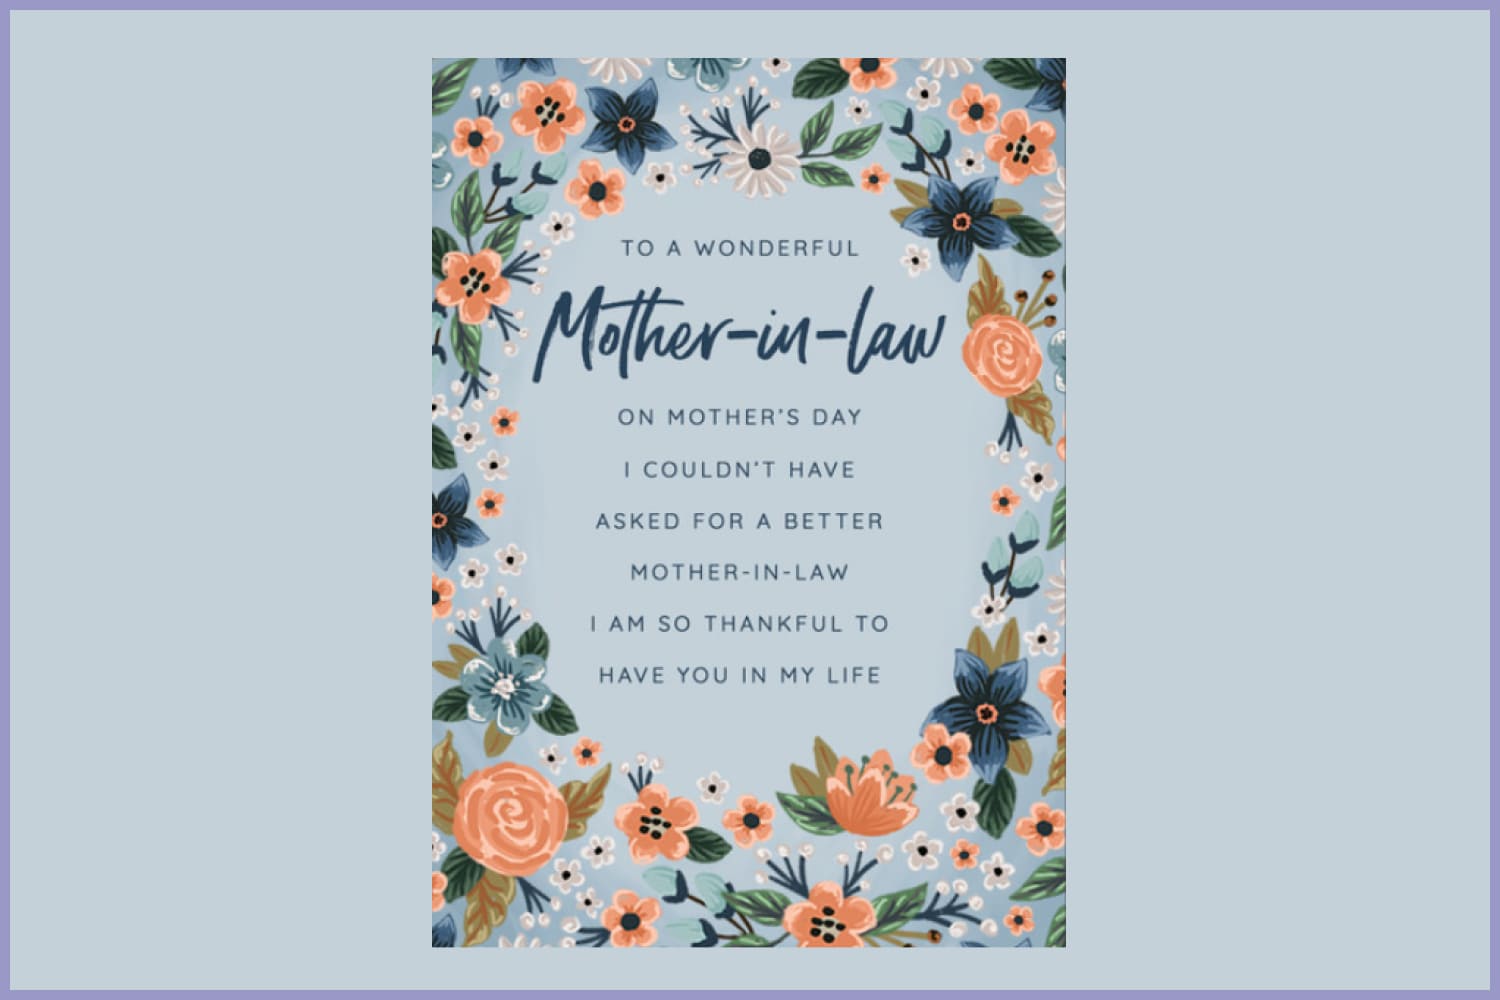 Image of a postcard with flowers and text in the center of the postcard.